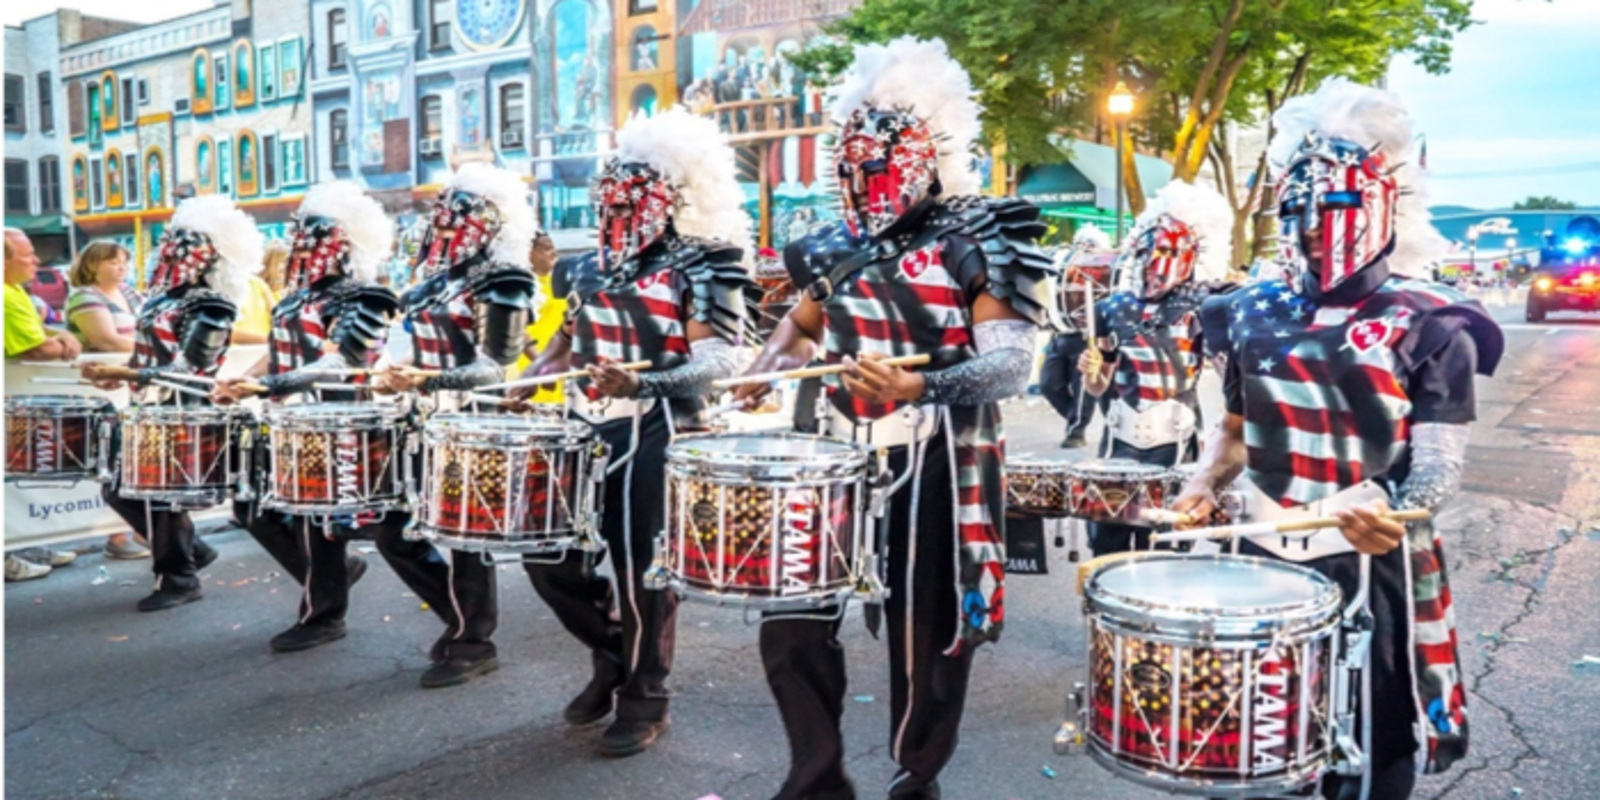 Local drum and bugle corps to perform in London’s New Year’s Day Parade